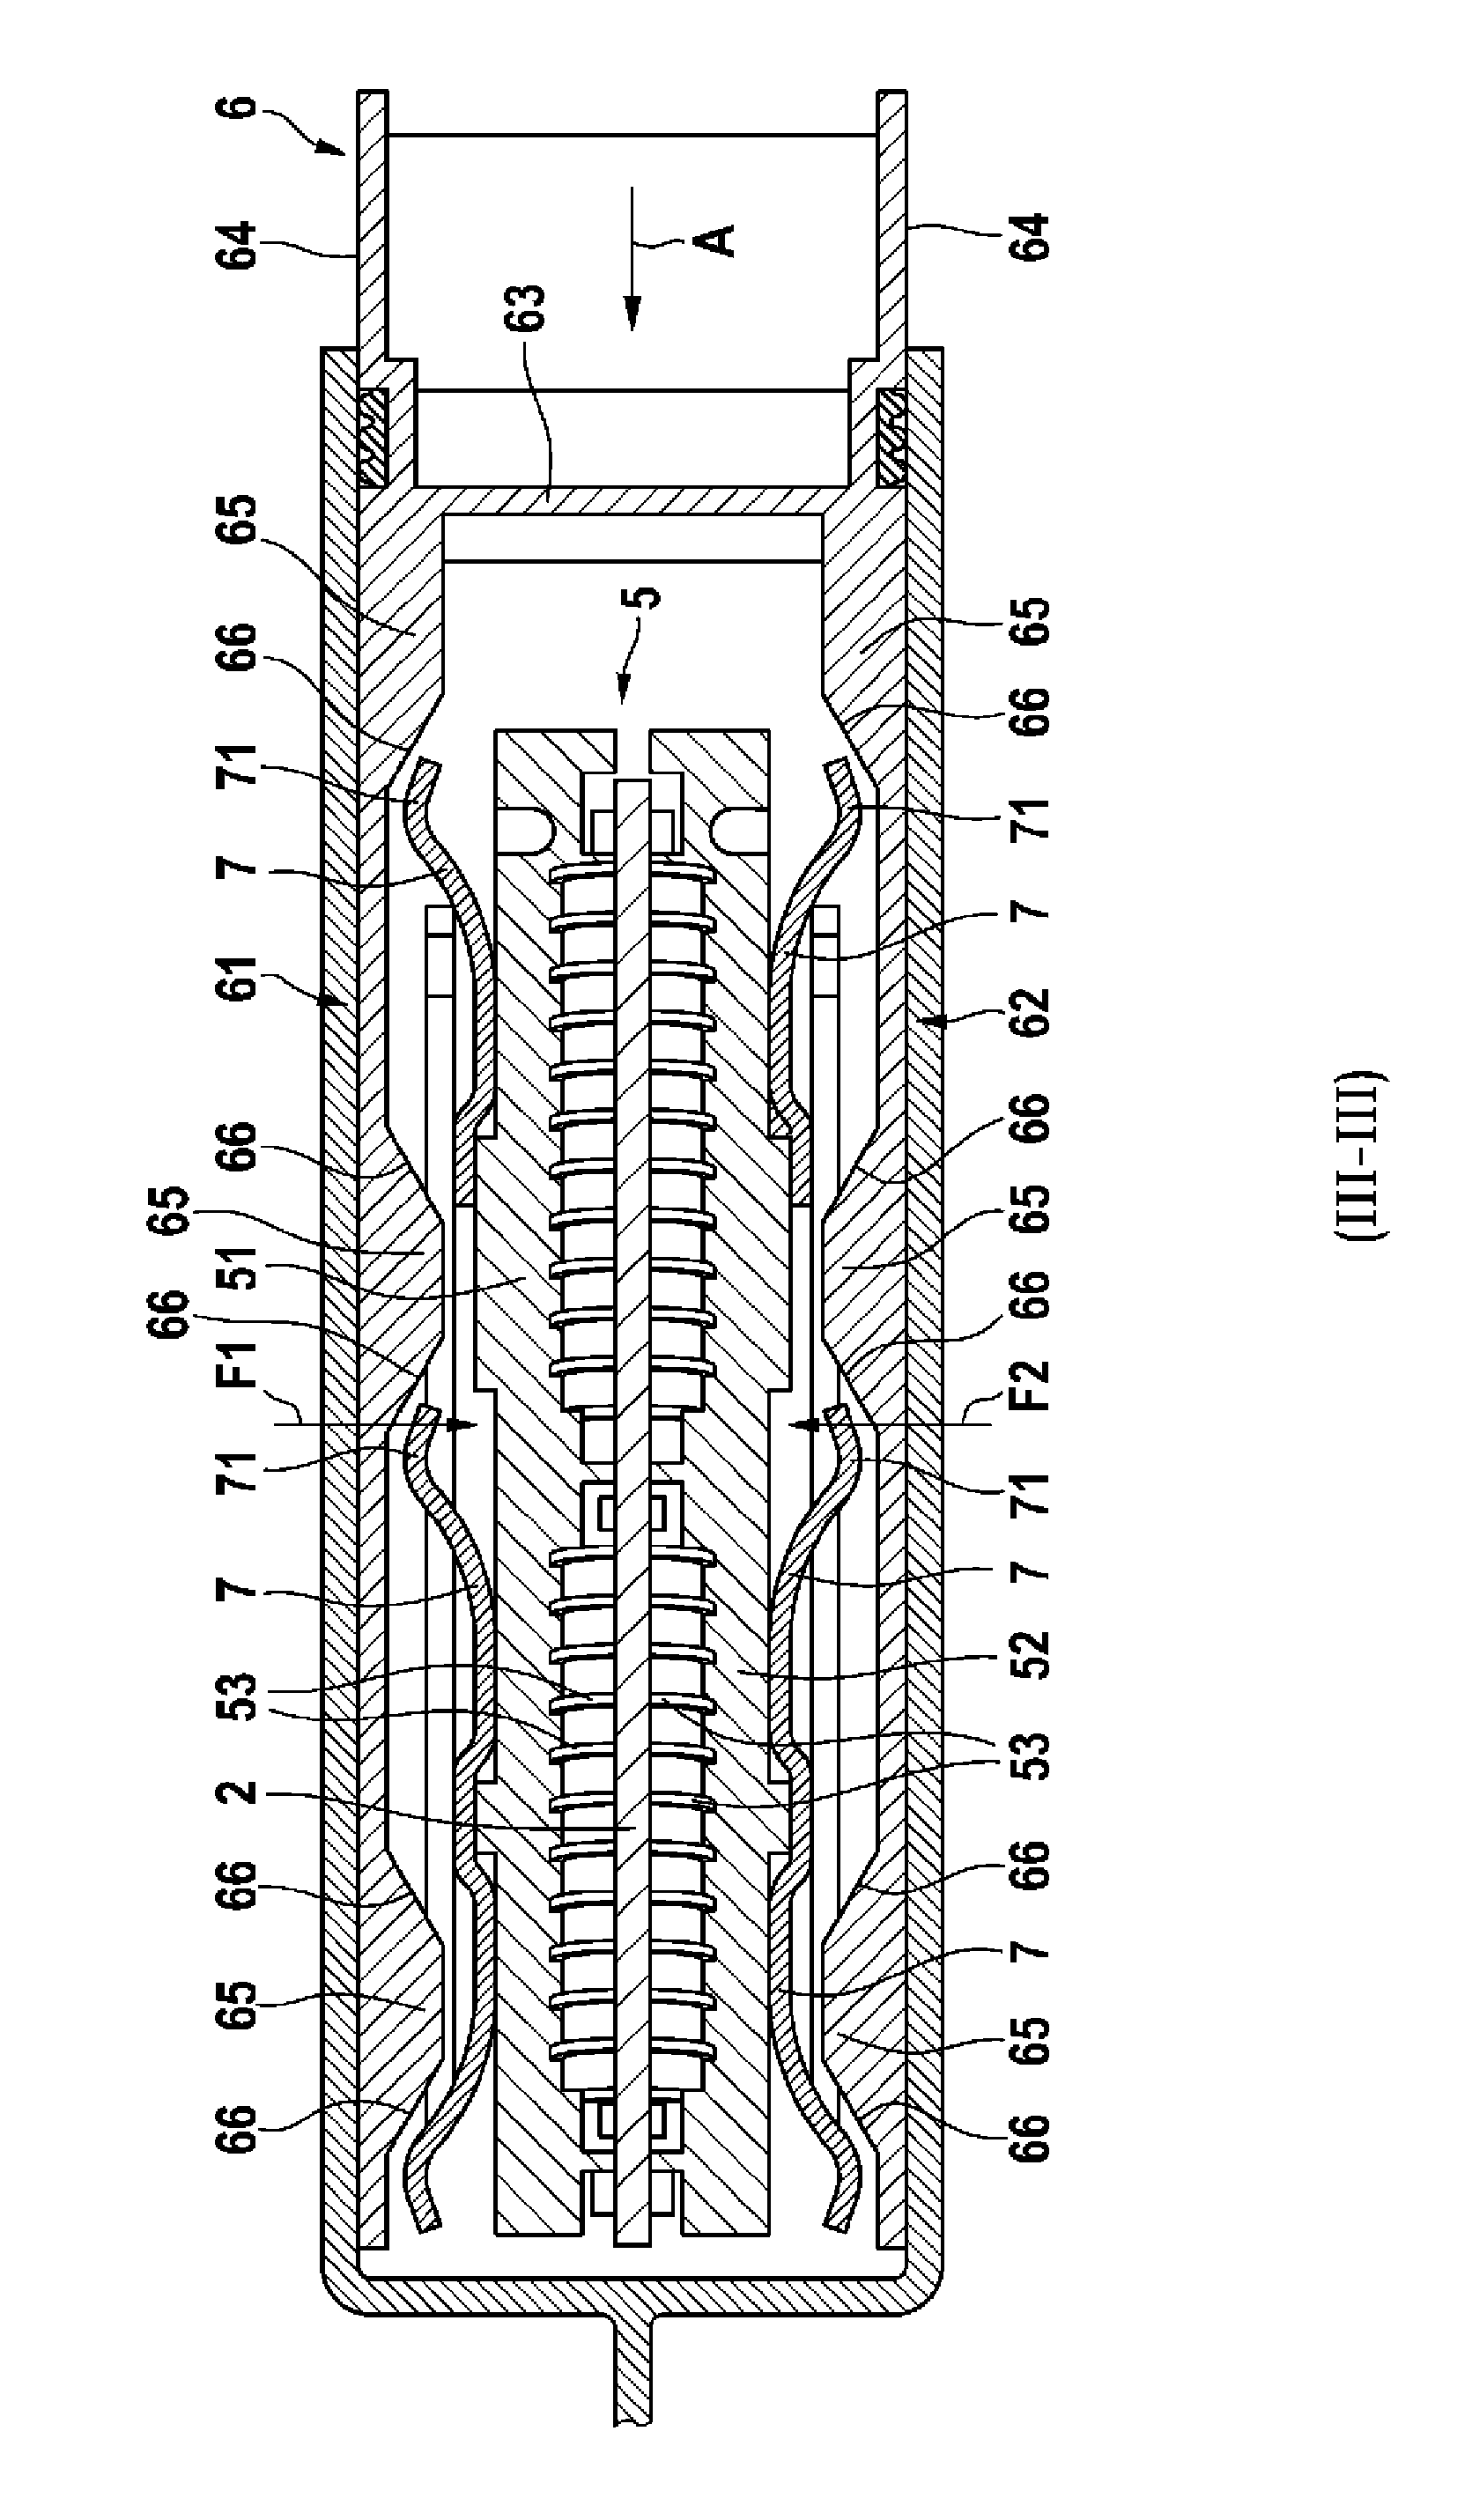 Direct plug element, in particular for vehicle control devices